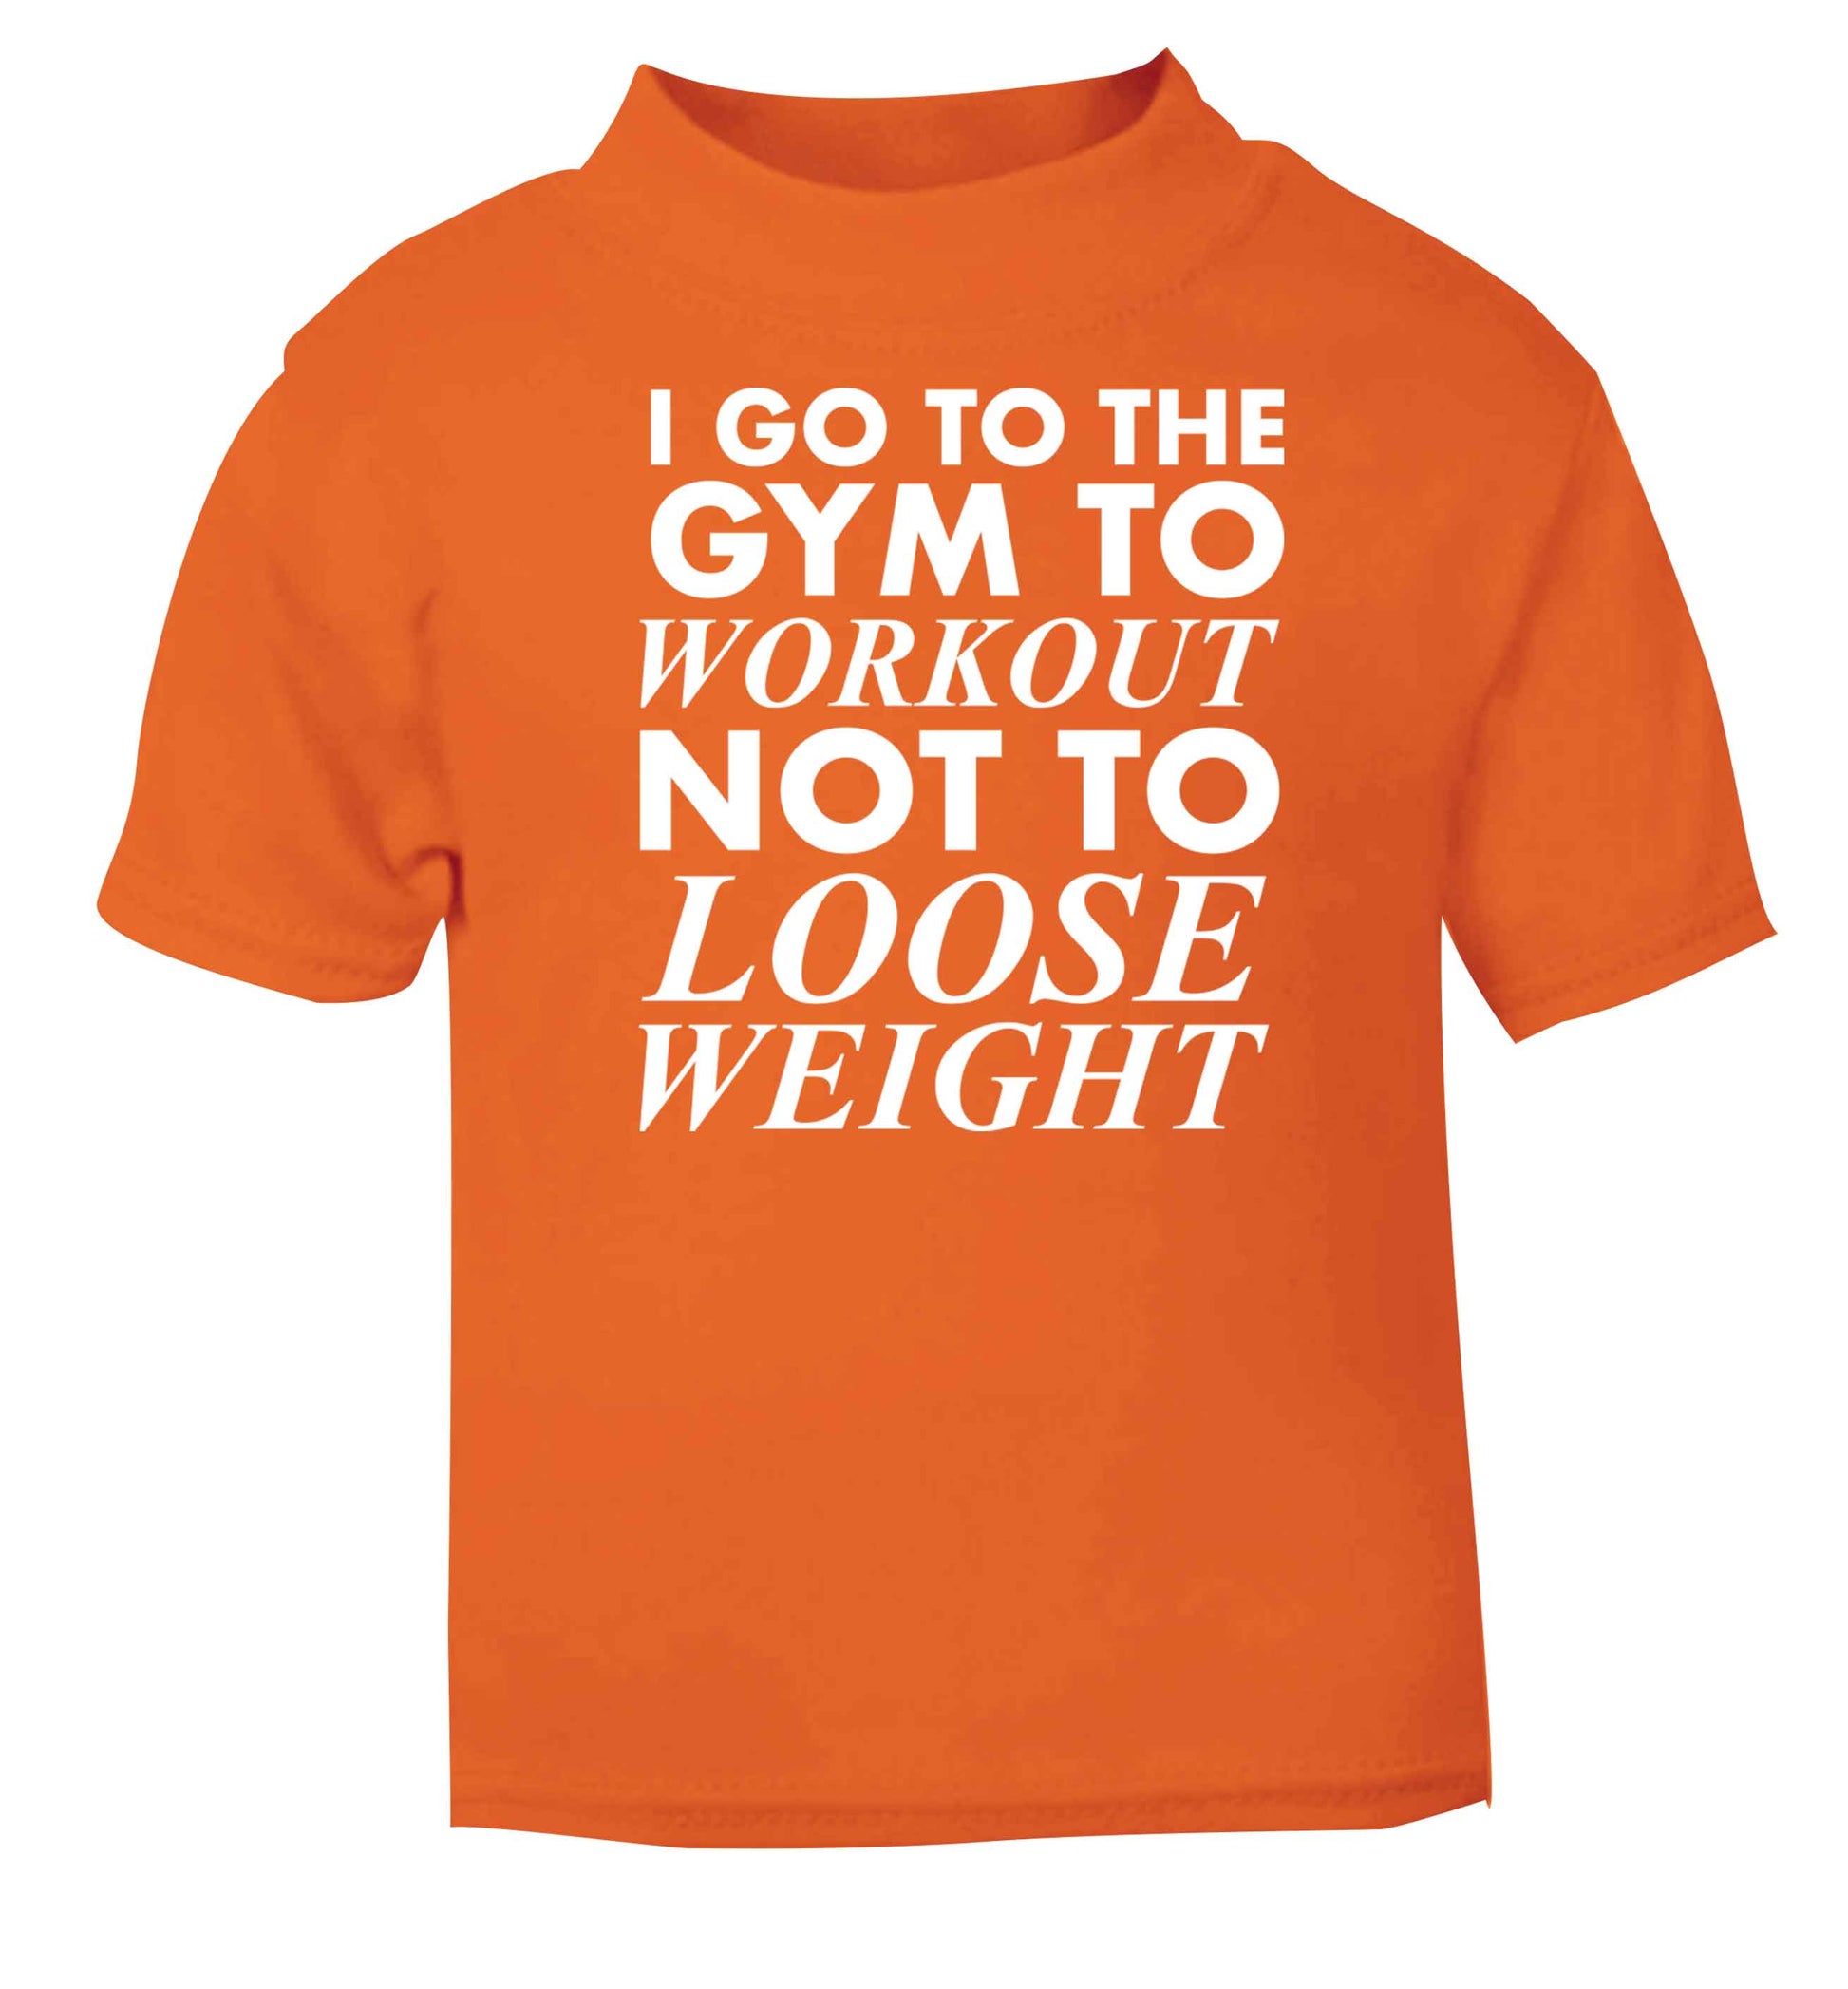 I go to the gym to workout not to loose weight orange baby toddler Tshirt 2 Years